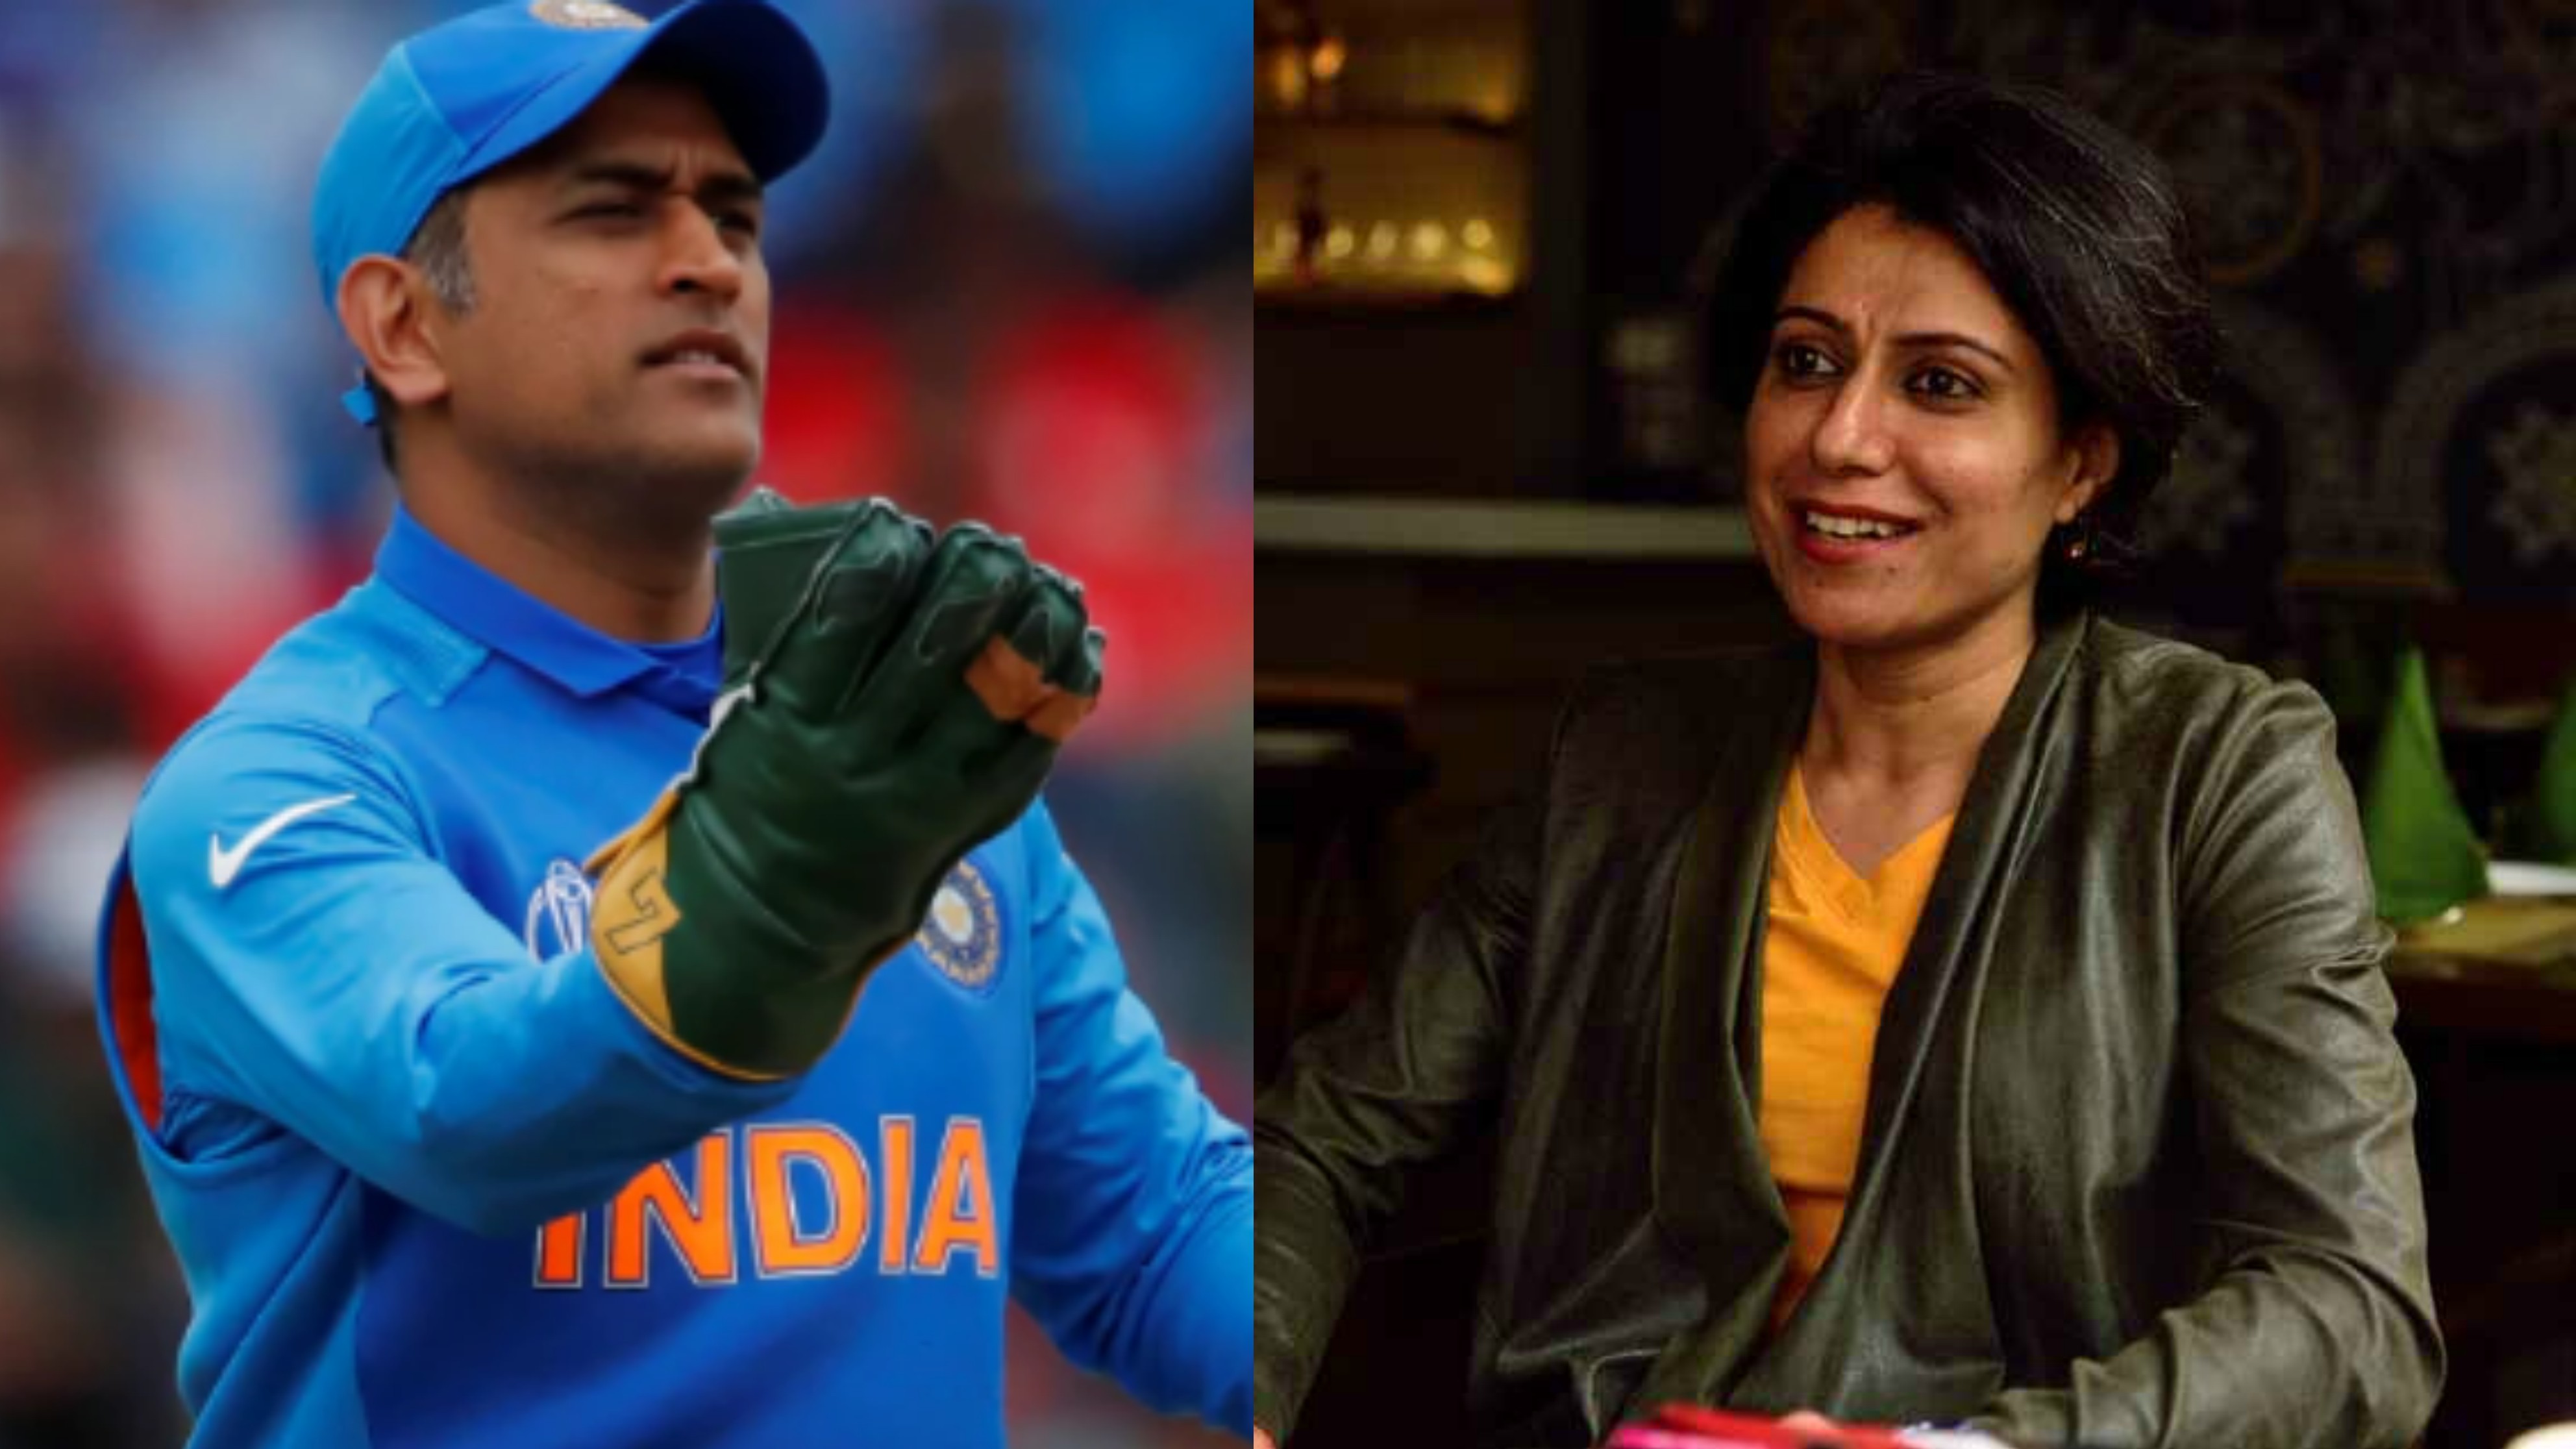 MS Dhoni already had retirement plans in mind before World Cup 2019, reveals Anjum Chopra